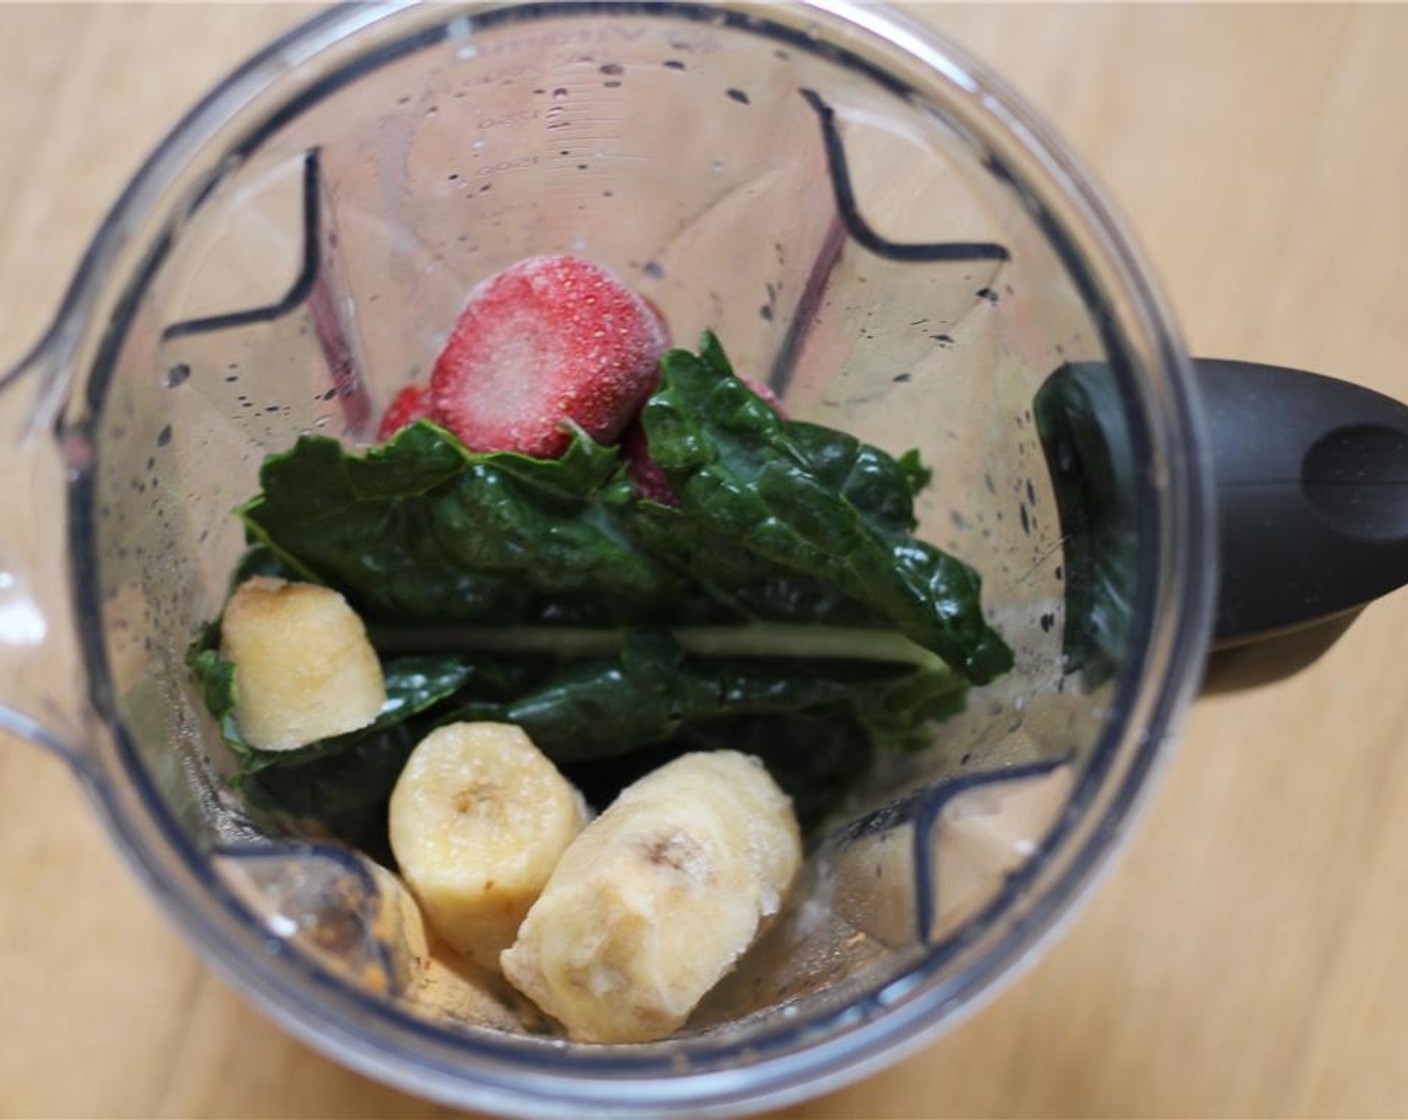 step 1 In a blender, add the Almond Milk (1 cup), Cacao Nibs (2 Tbsp), Kale (2 cups), Banana (1), Frozen Strawberries (1/4 cup), Vanilla Whey Protein Powder (1/4 cup), and Ground Cinnamon (1/8 tsp).